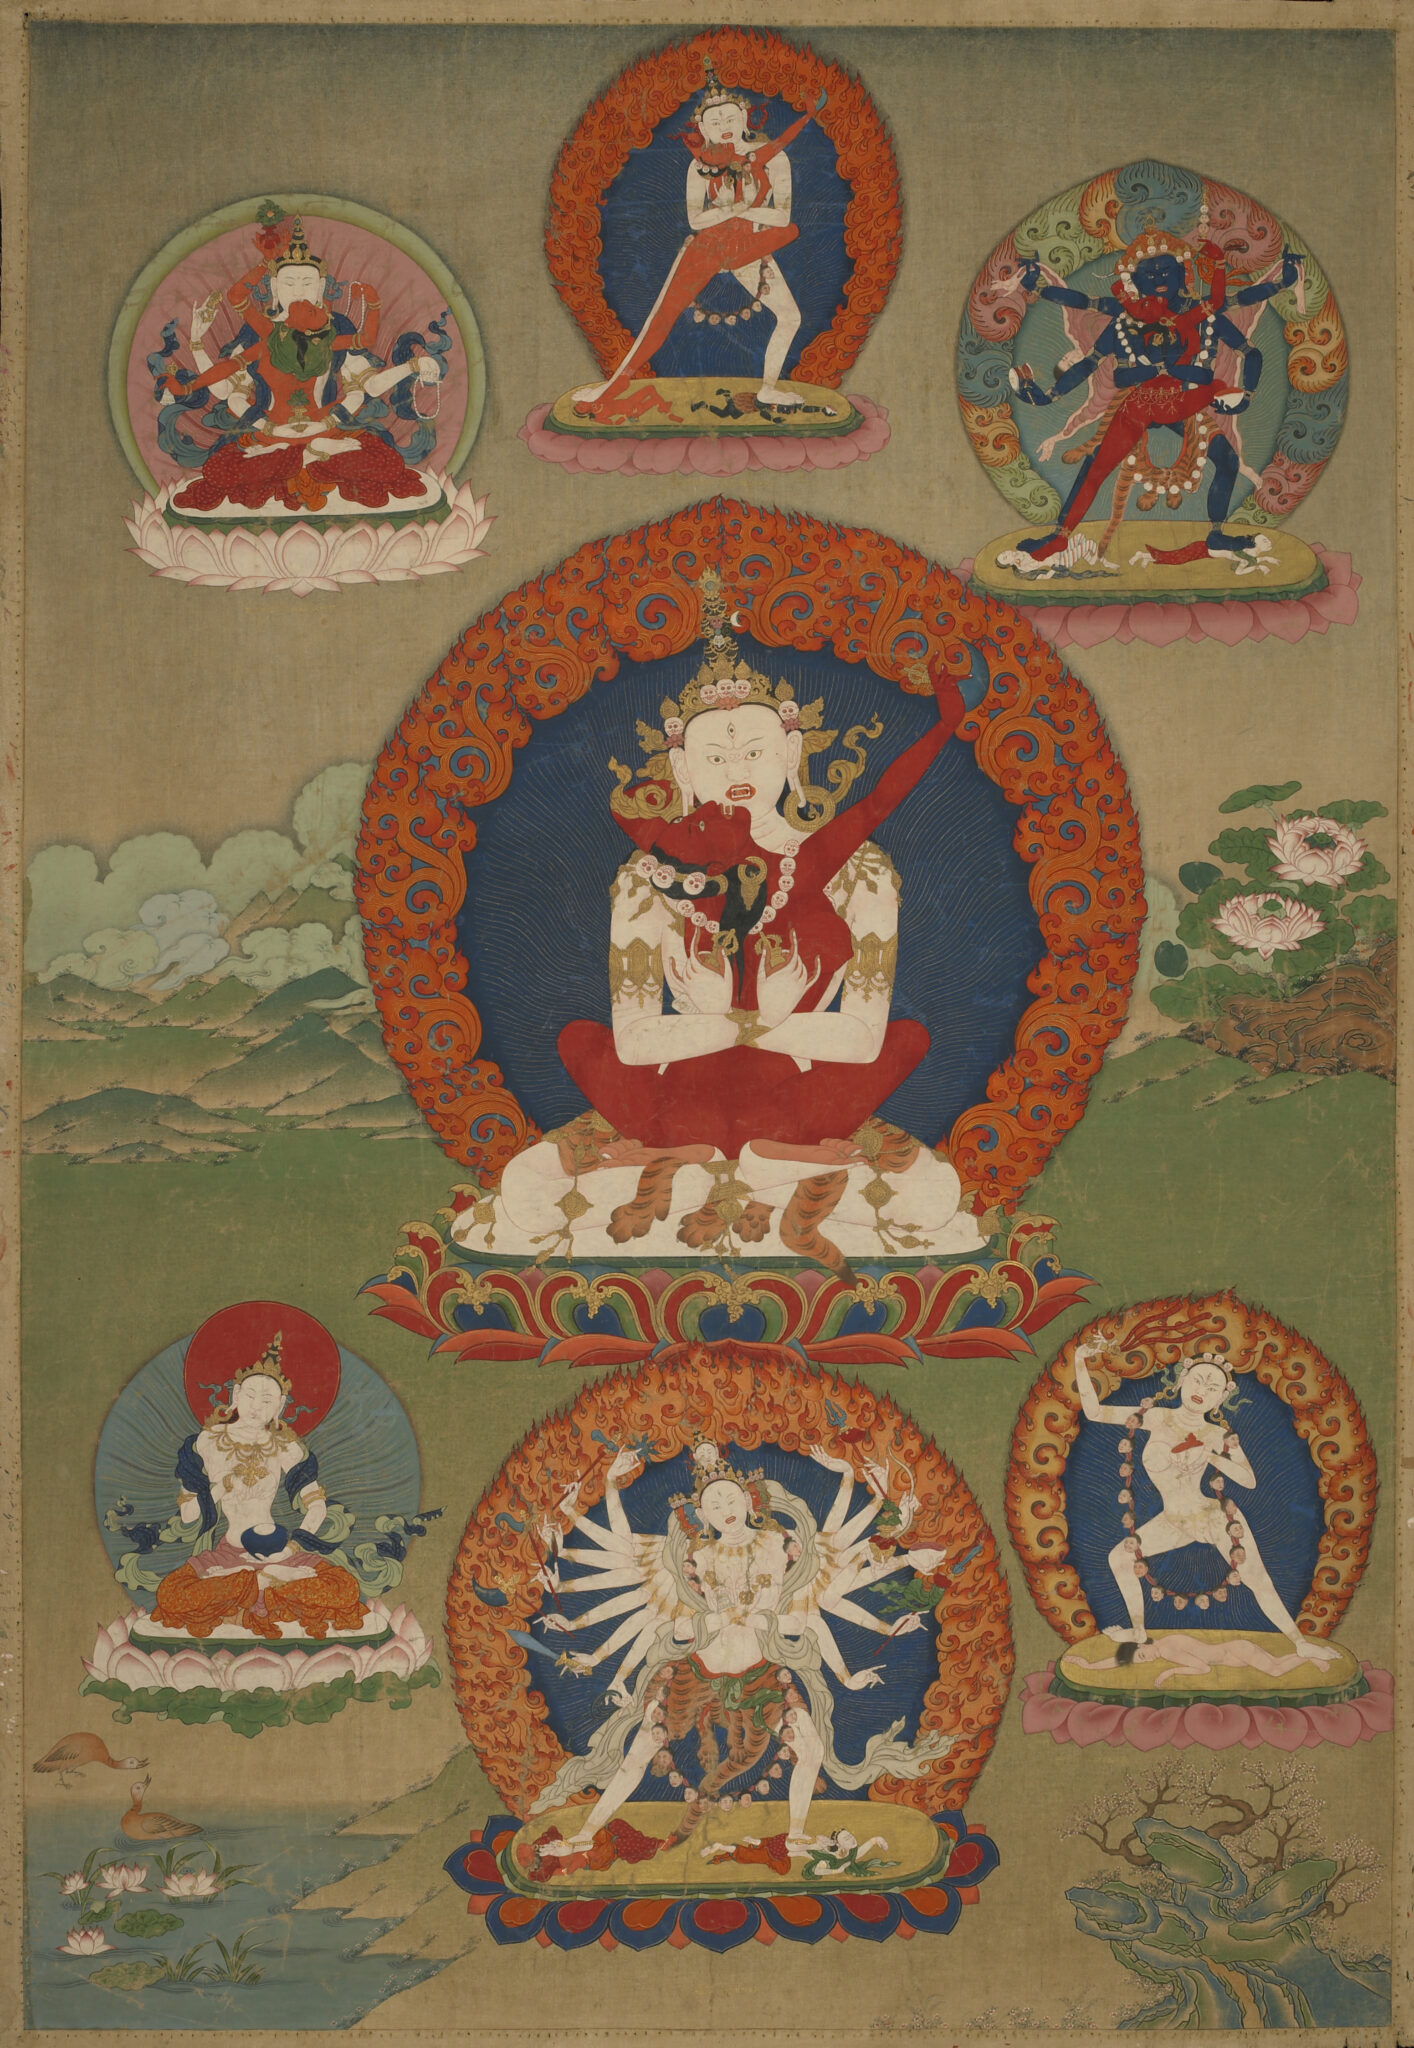 Wrathful deity locked in embrace with consort above mountain landscape surrounded by six deity portraits